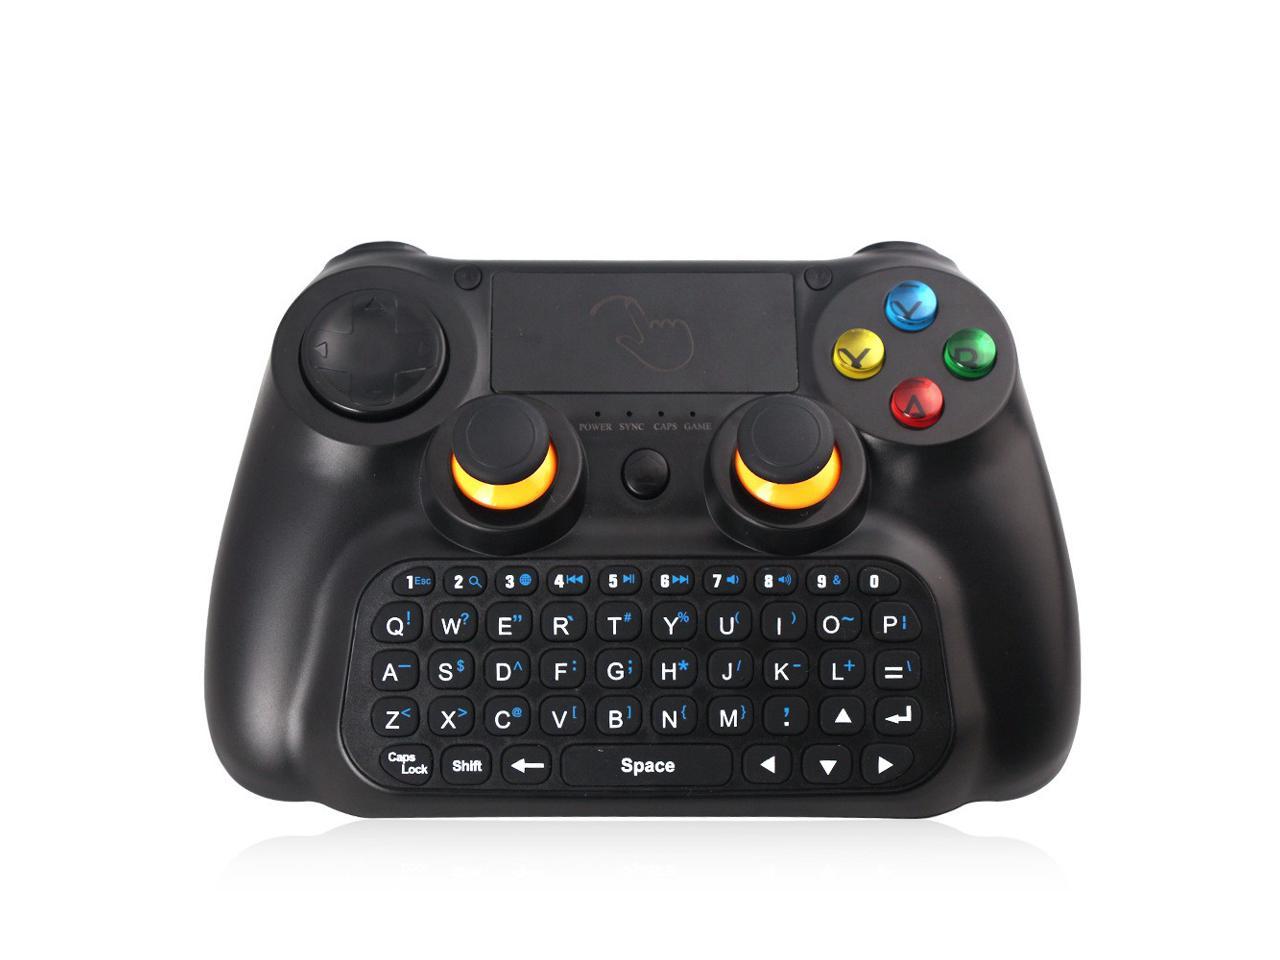 Ti 501 Dobe 3 In 1 2 4g Bluetooth Gamepad Controller With Keyboard Touchpad For Android Smartphone Tablet Smart Tv Pc Newegg Com